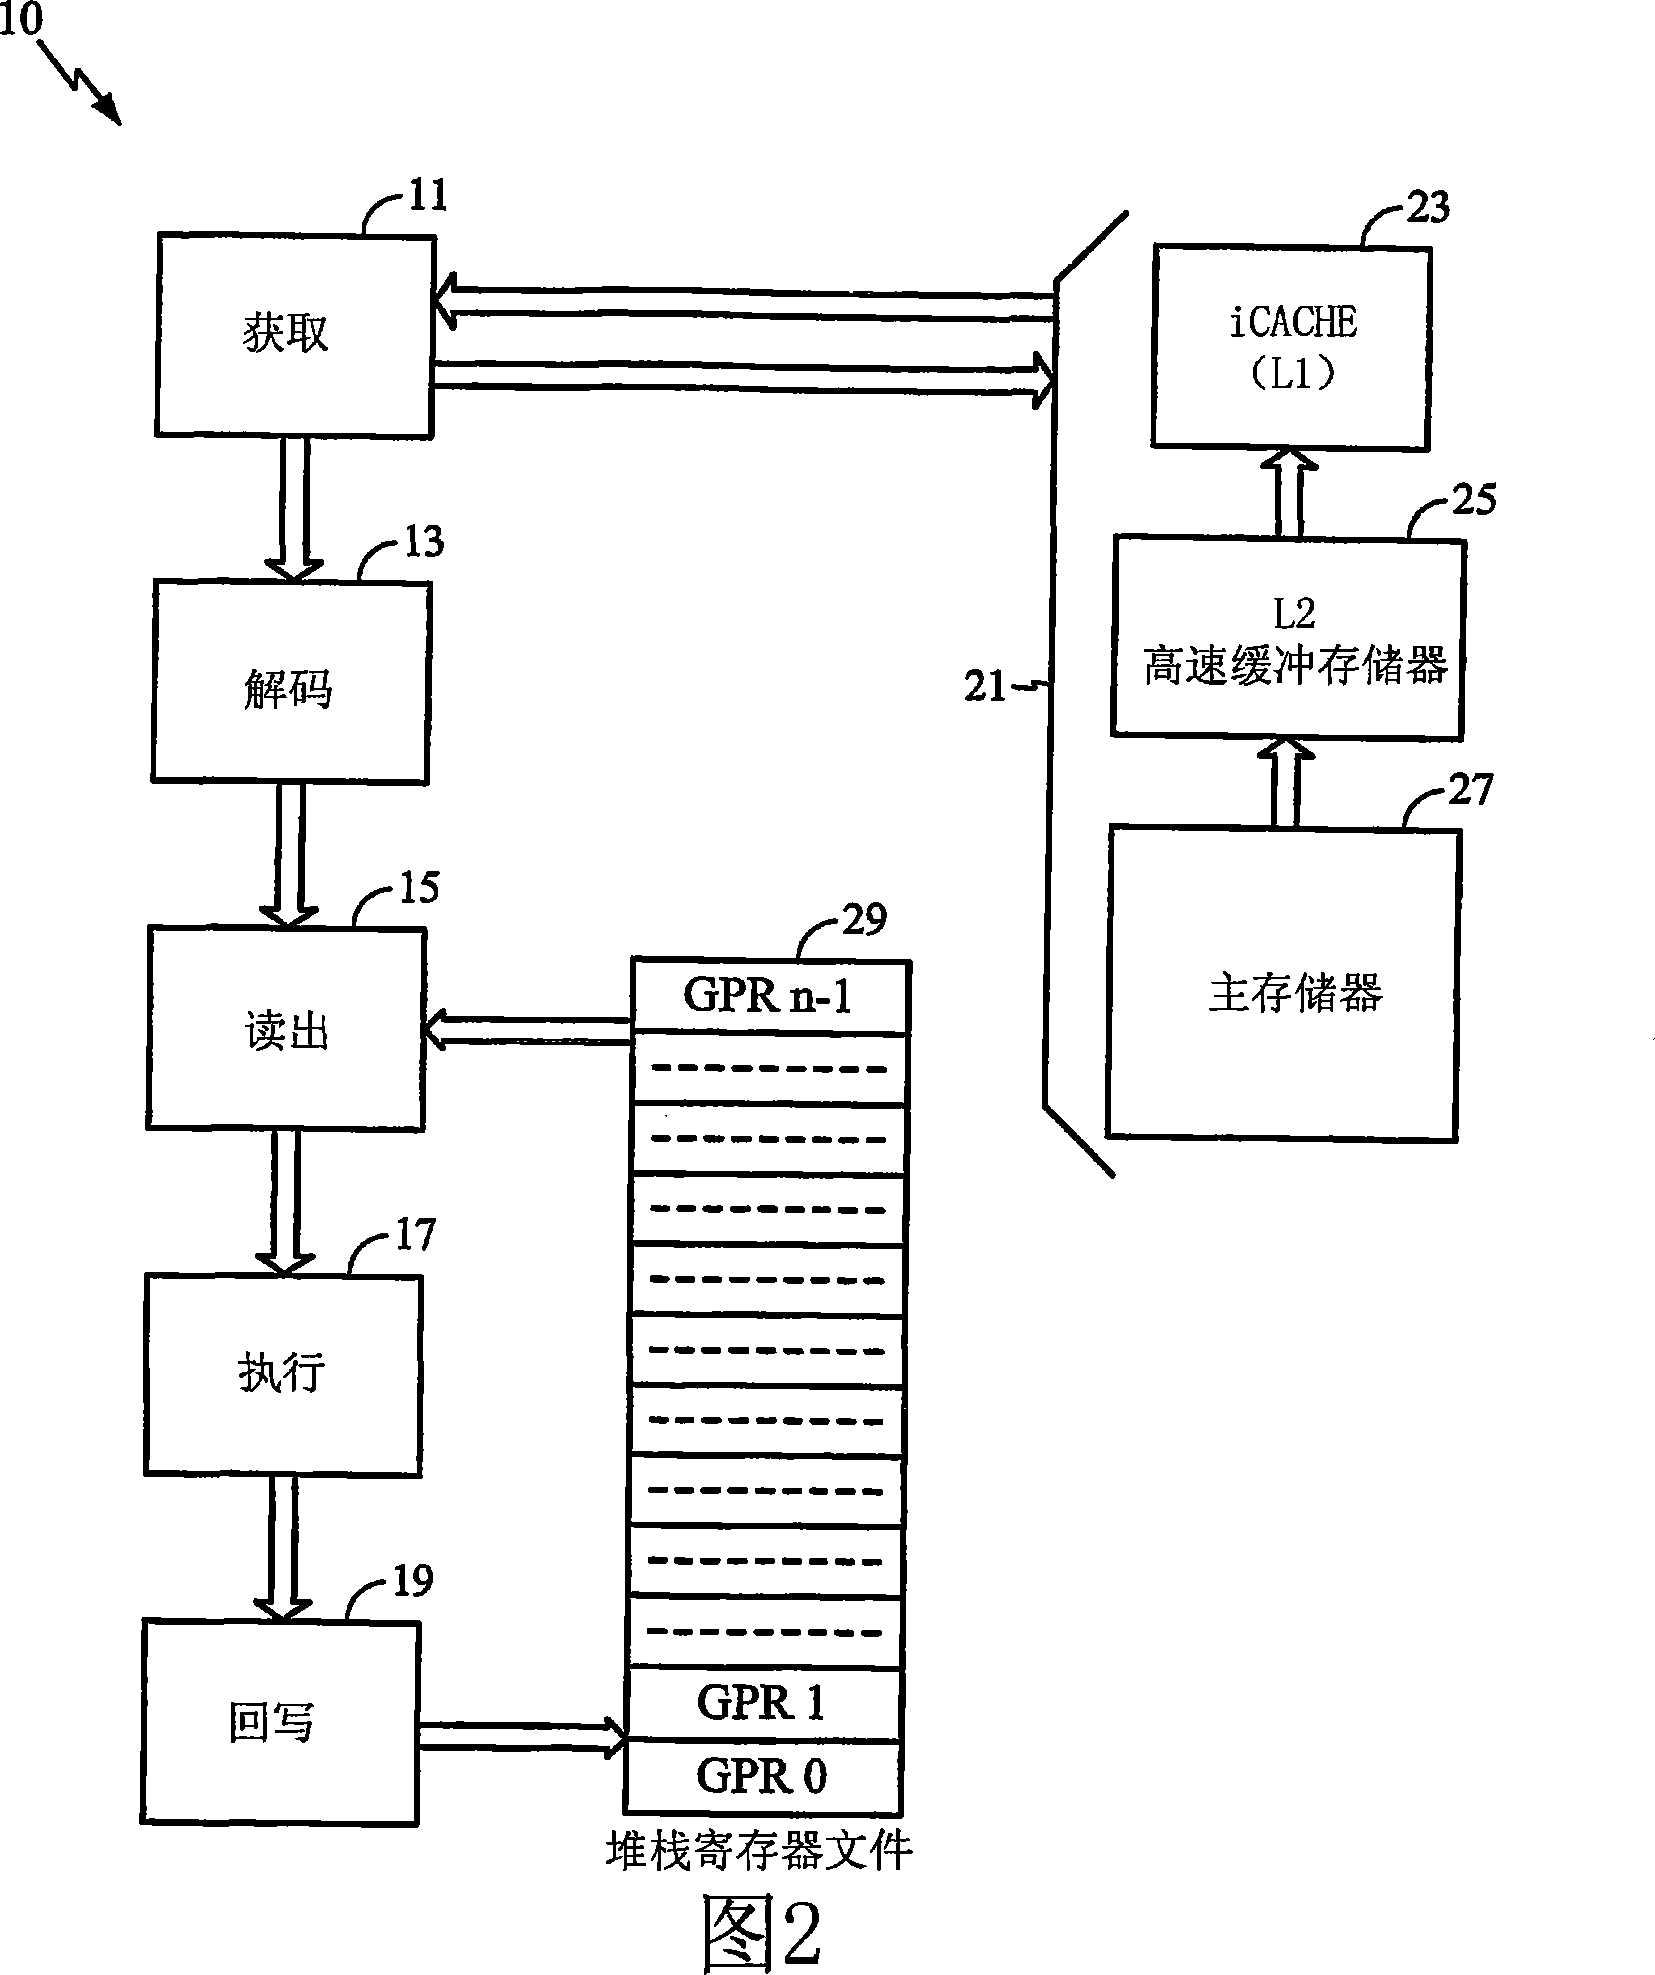 Handling cache miss in an instruction crossing a cache line boundary